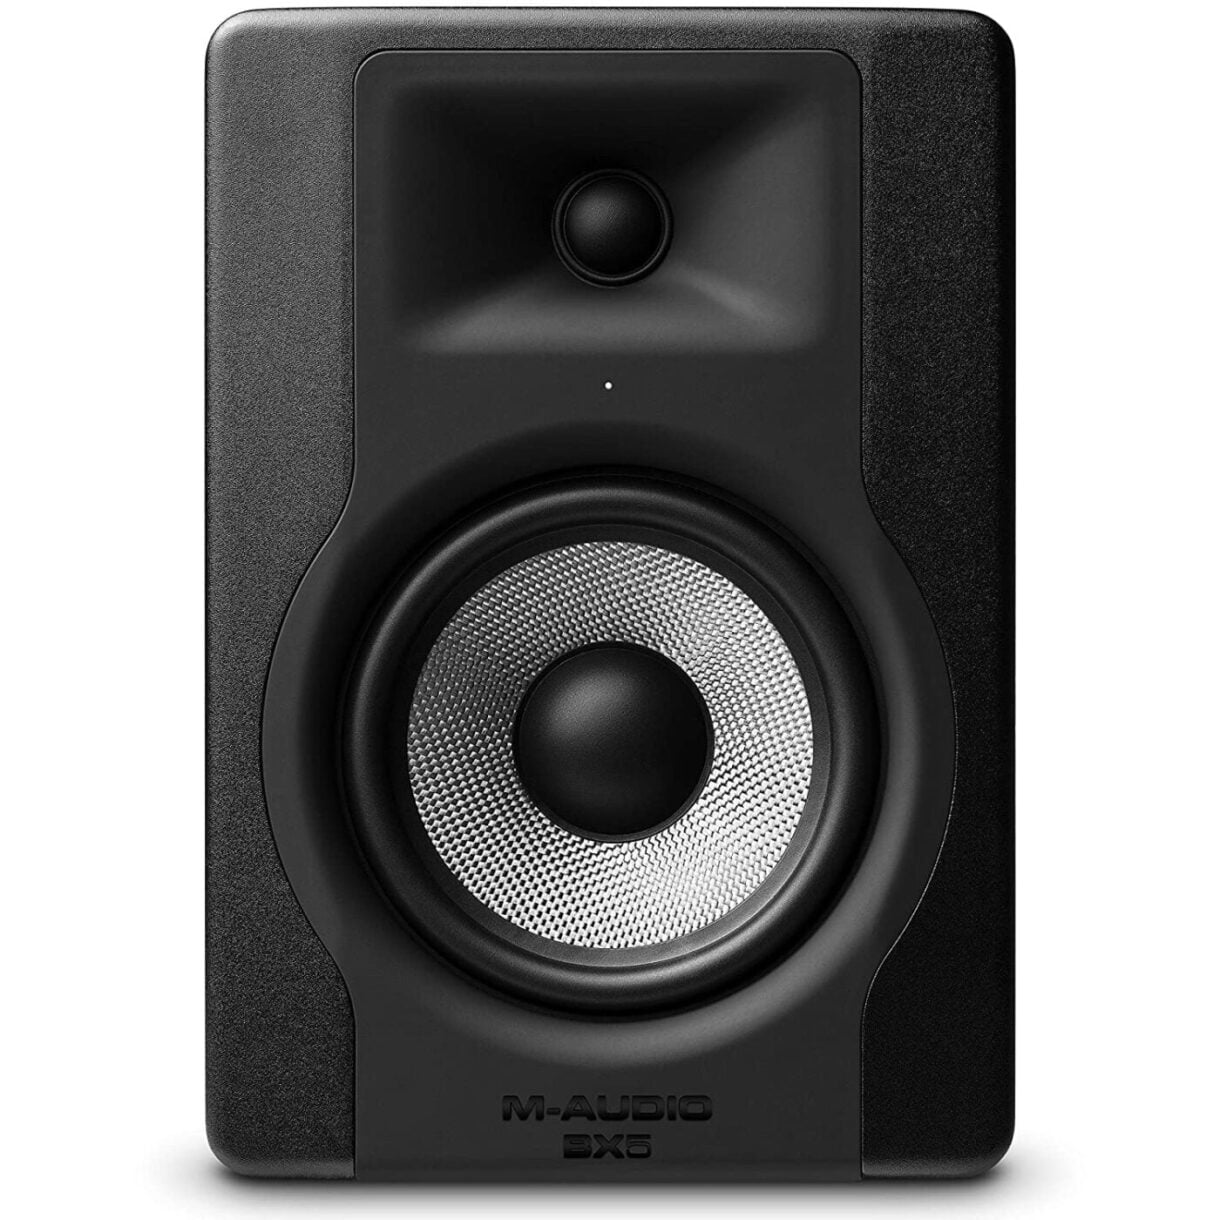 M-Audio BX5 D3 Compact 2-Way 5 Inch Active Studio Monitor Speaker for Music Production and Mixing